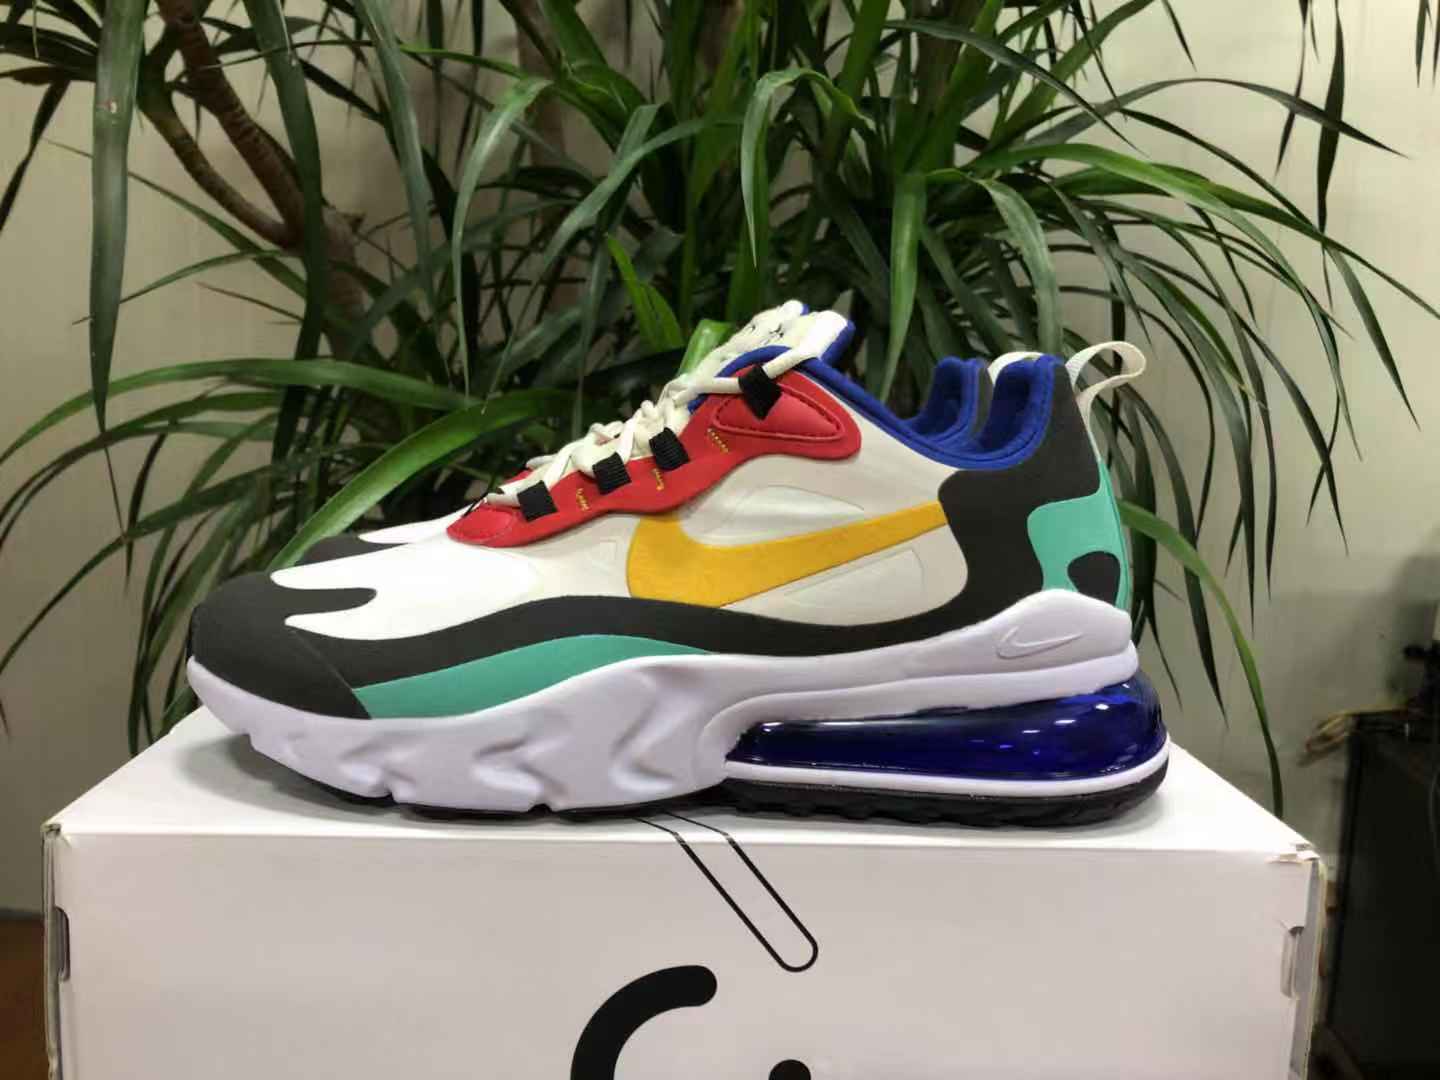 Women's Hot sale Running weapon Air Max Shoes 033